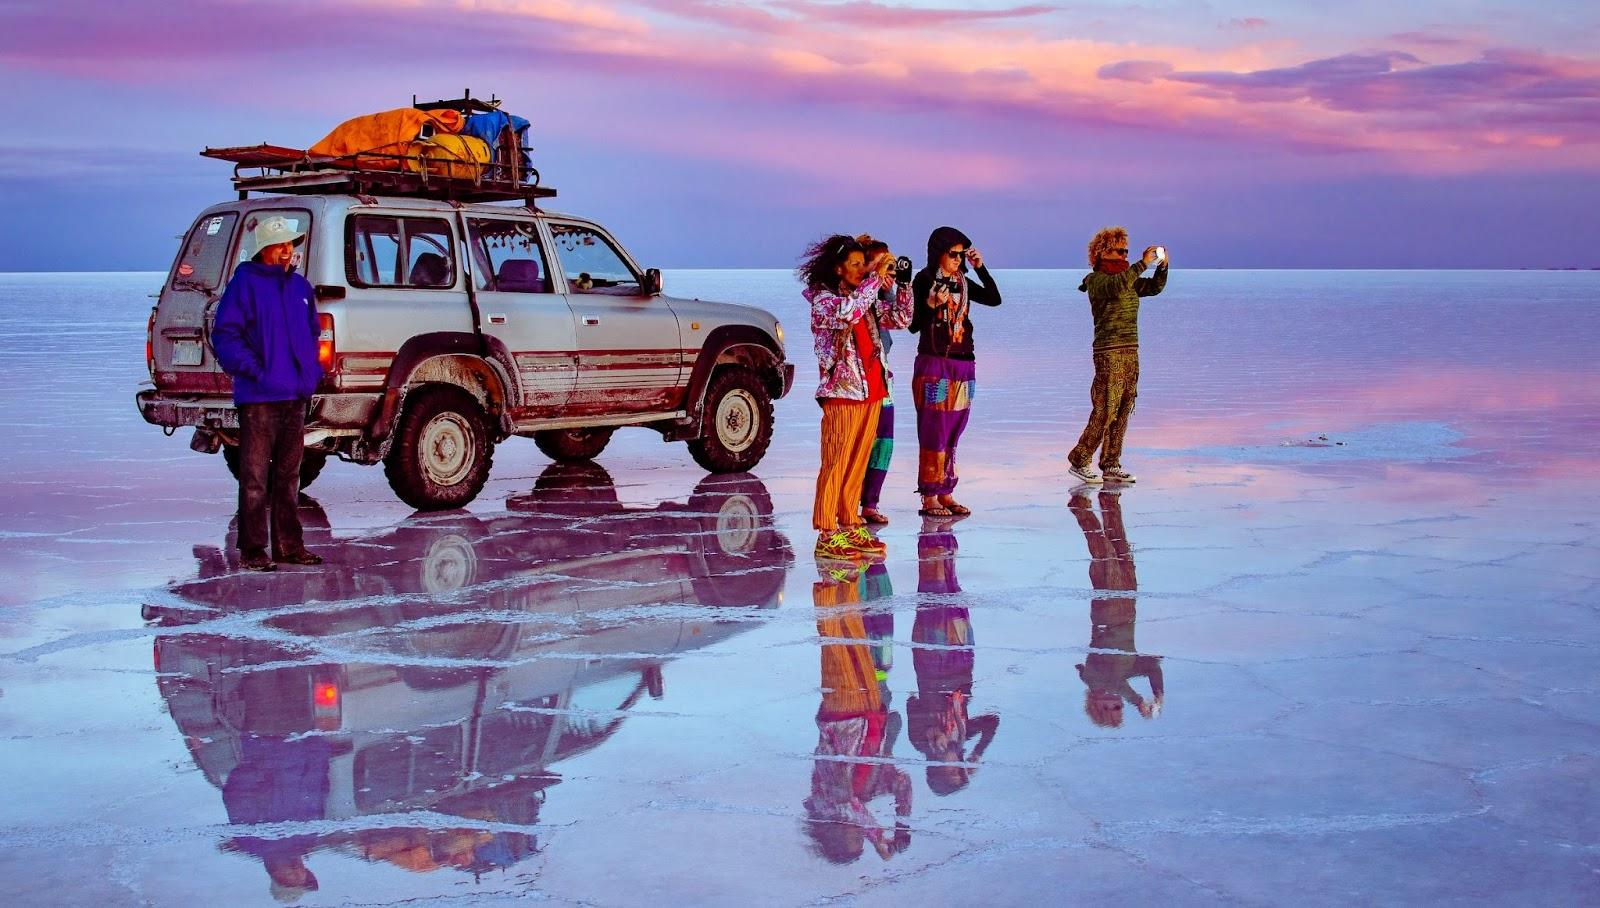 Group of tourists standing in front of a 4x4  taking pictures at sunset in Salar de Uyuni salt flats, Bolivia